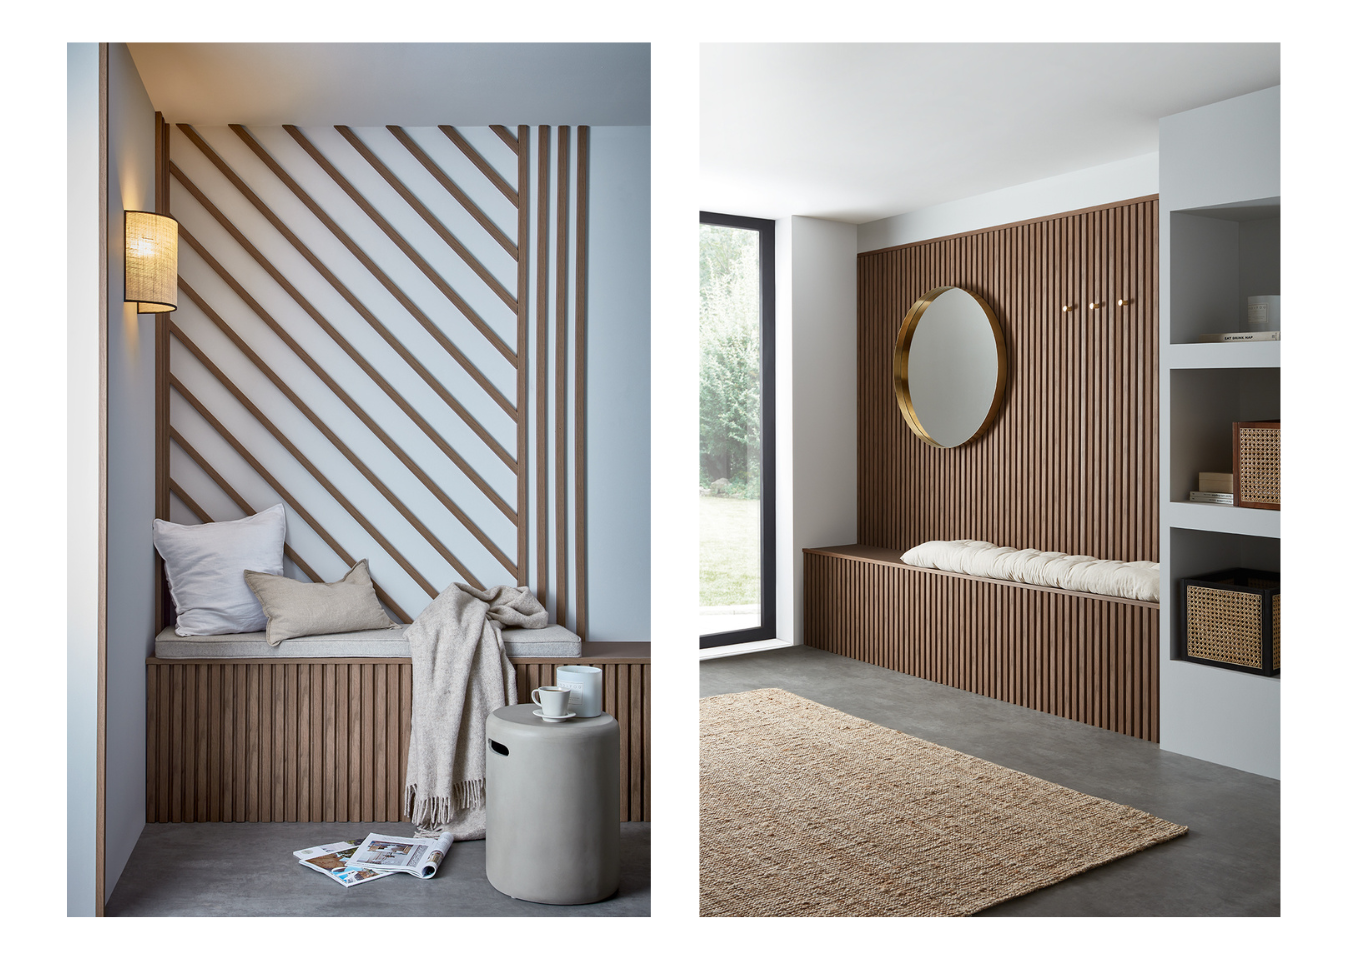 Two hallways with a seating nook. Left: with diagonal SlatWall Waterproof Walnut individual slats. Right: with wall panels.